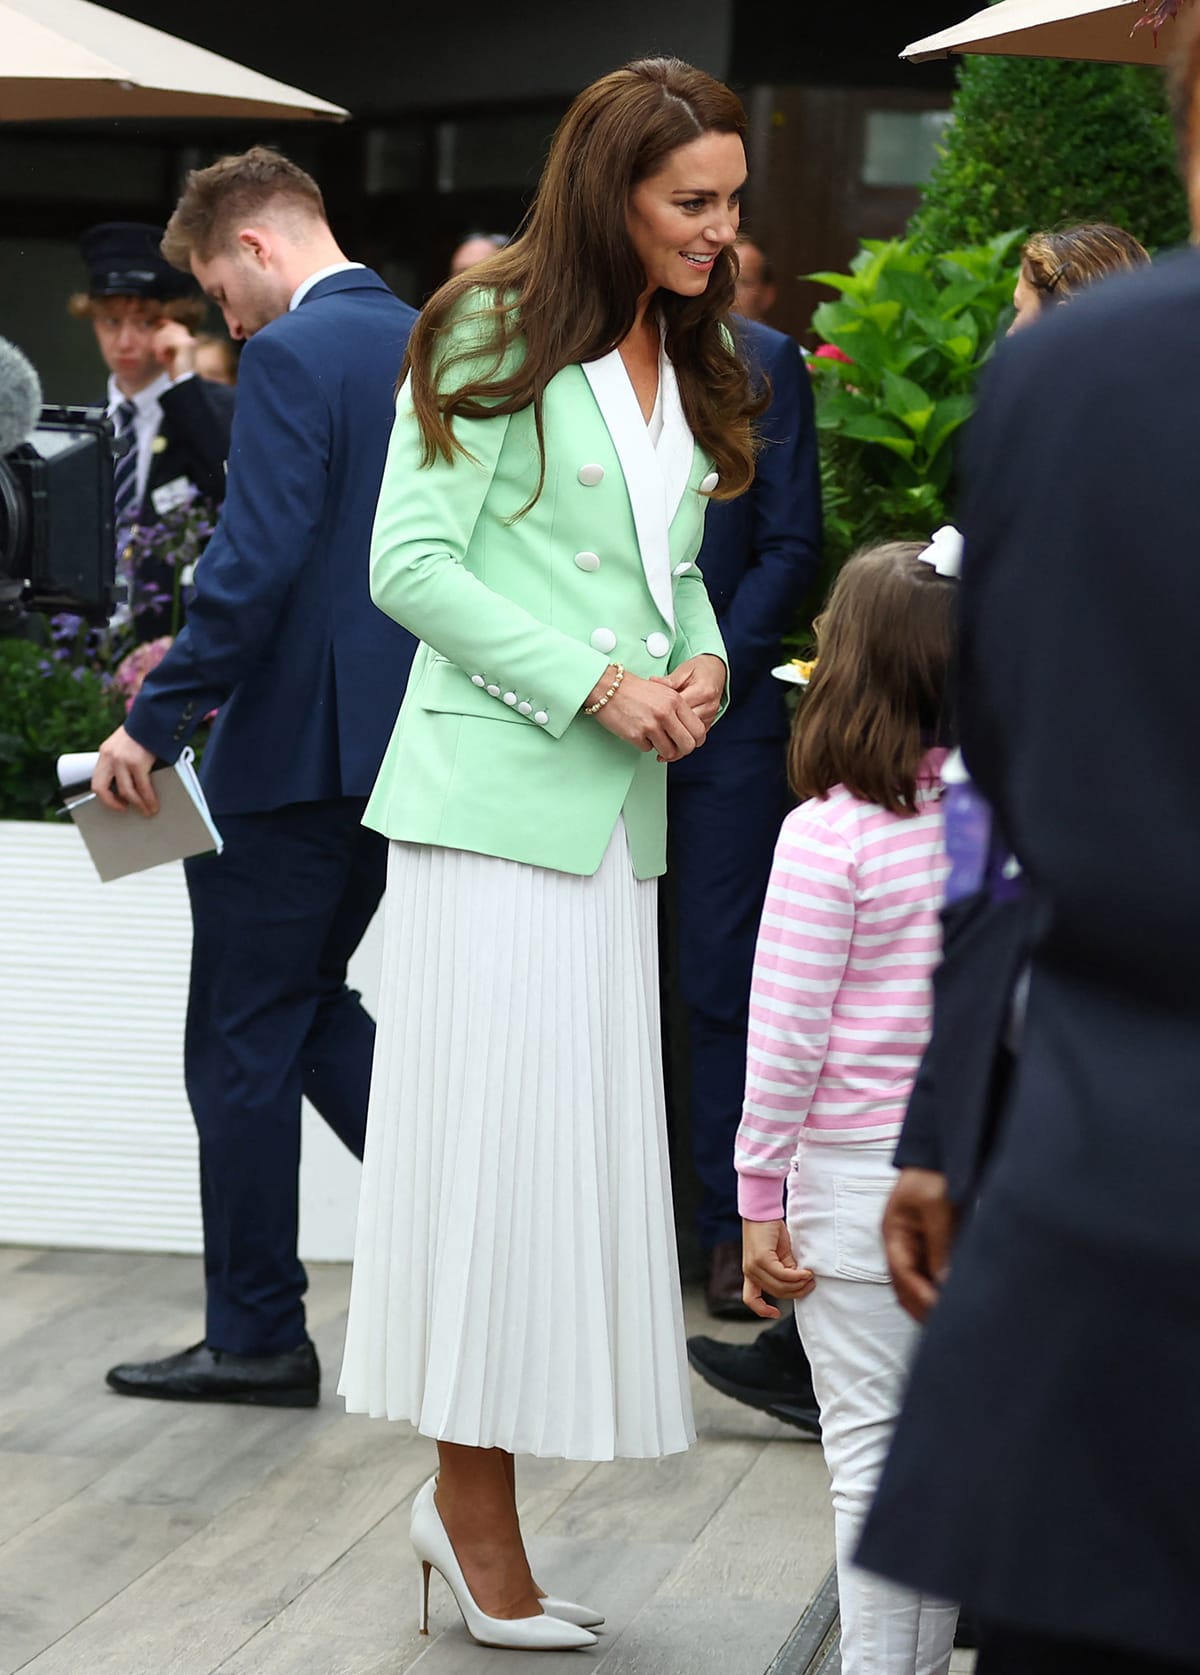 Kate Middleton attends day two of the 2023 Wimbledon Championships at the All England Lawn Tennis and Croquet Club in a Balmain mint green and white blazer and a white pleated dress on July 4, 2023